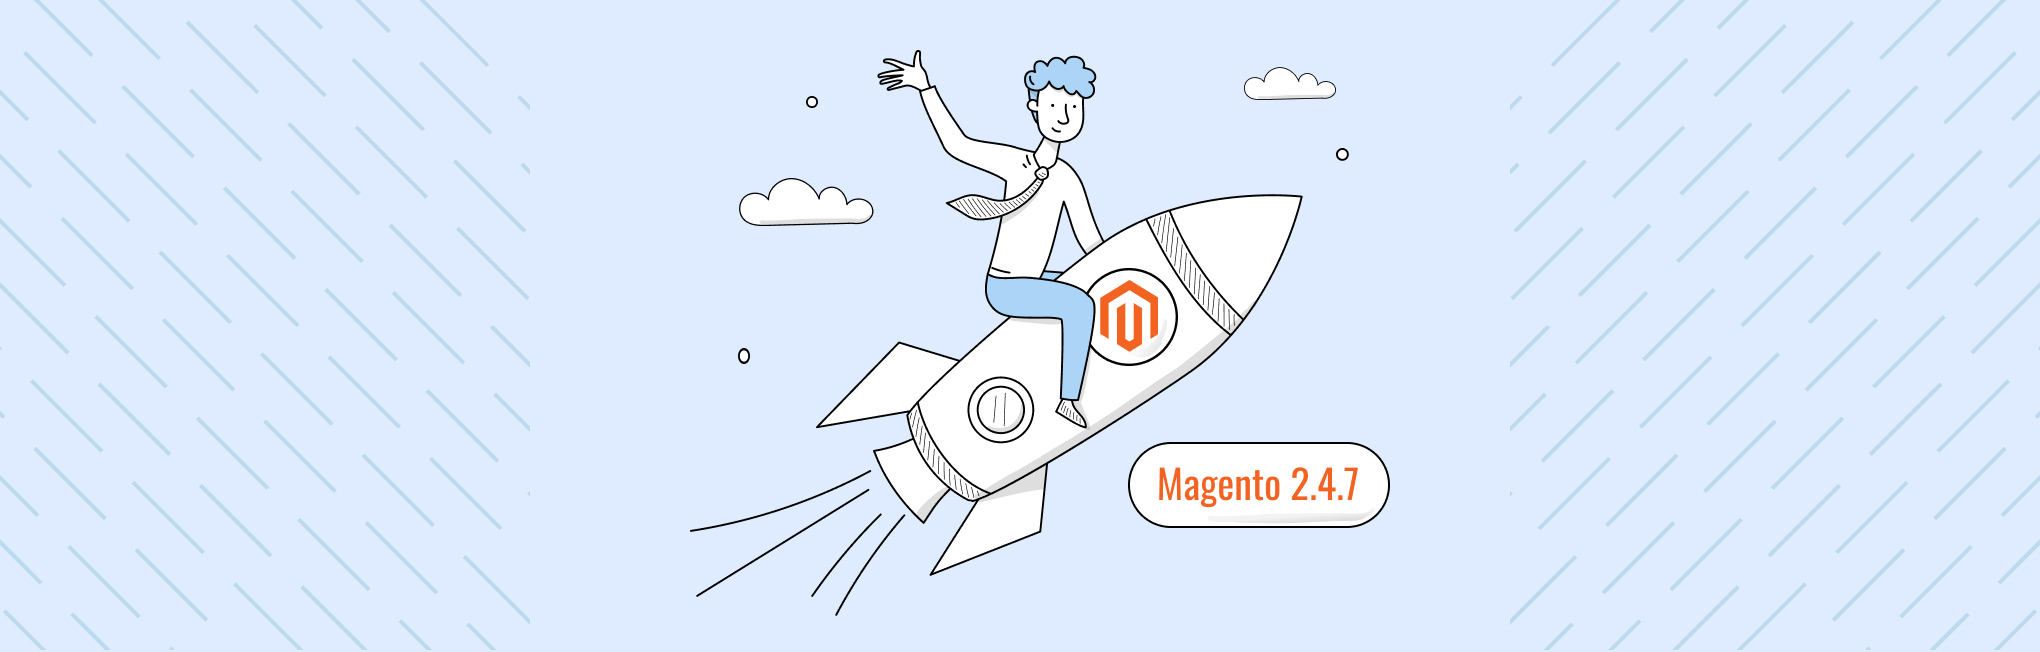 Magento 2.4.7 Release — Key Highlights, Features, & Fixes